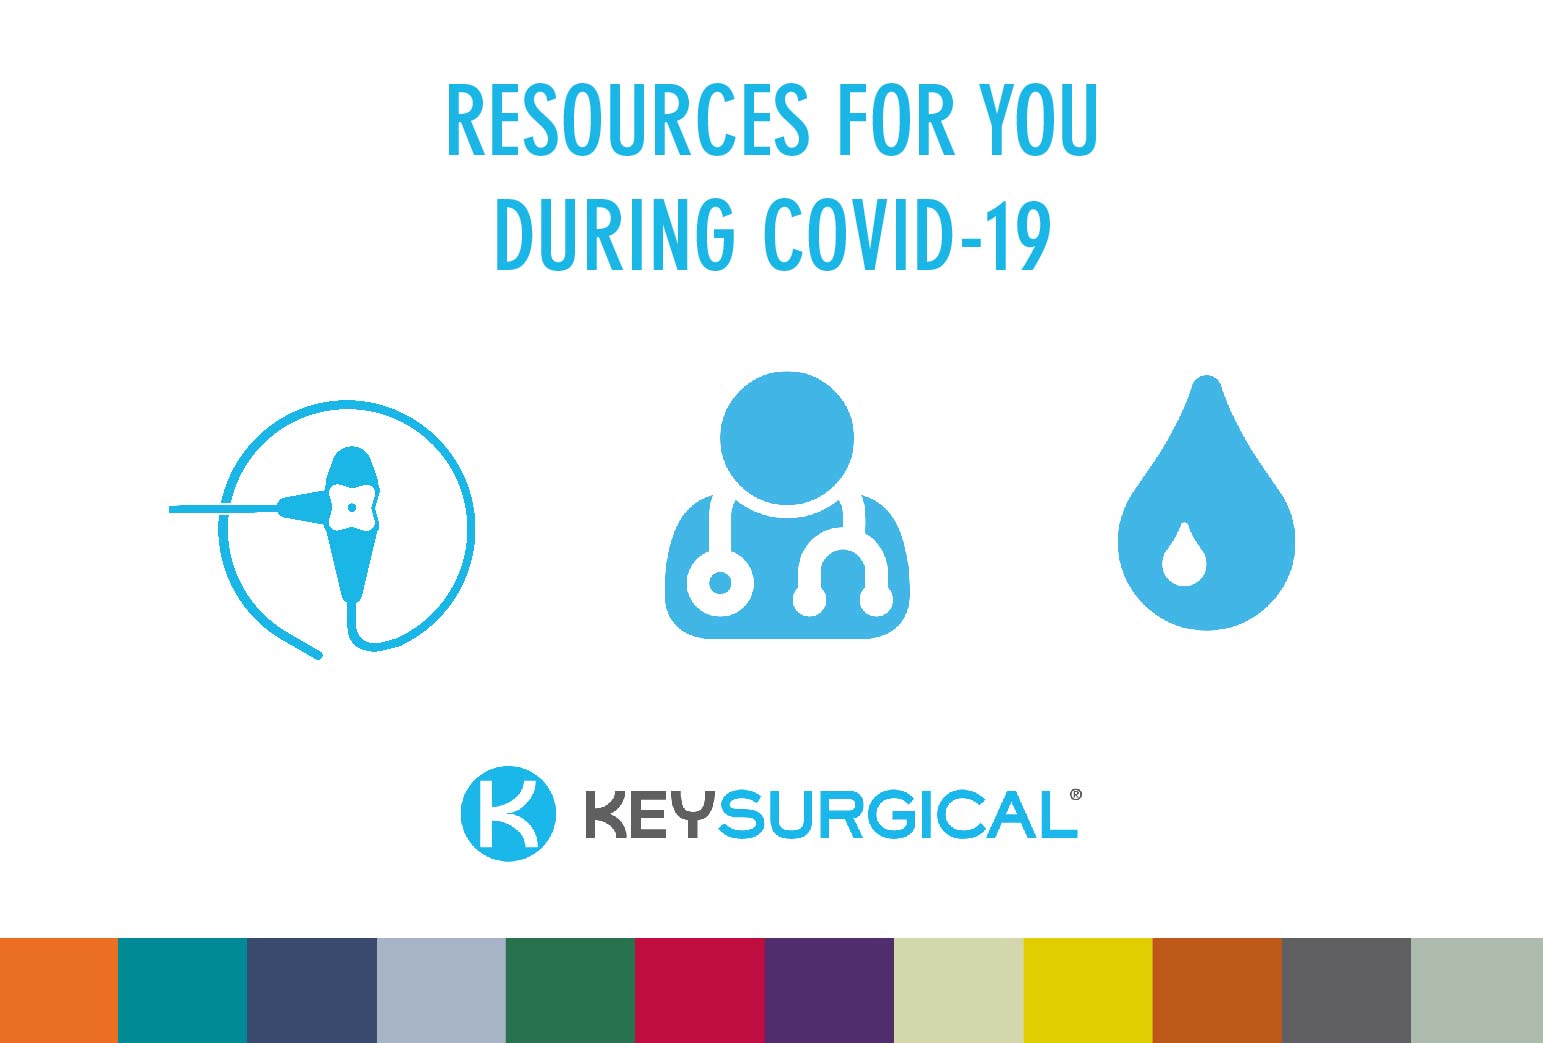 Resources for You During COVID-19